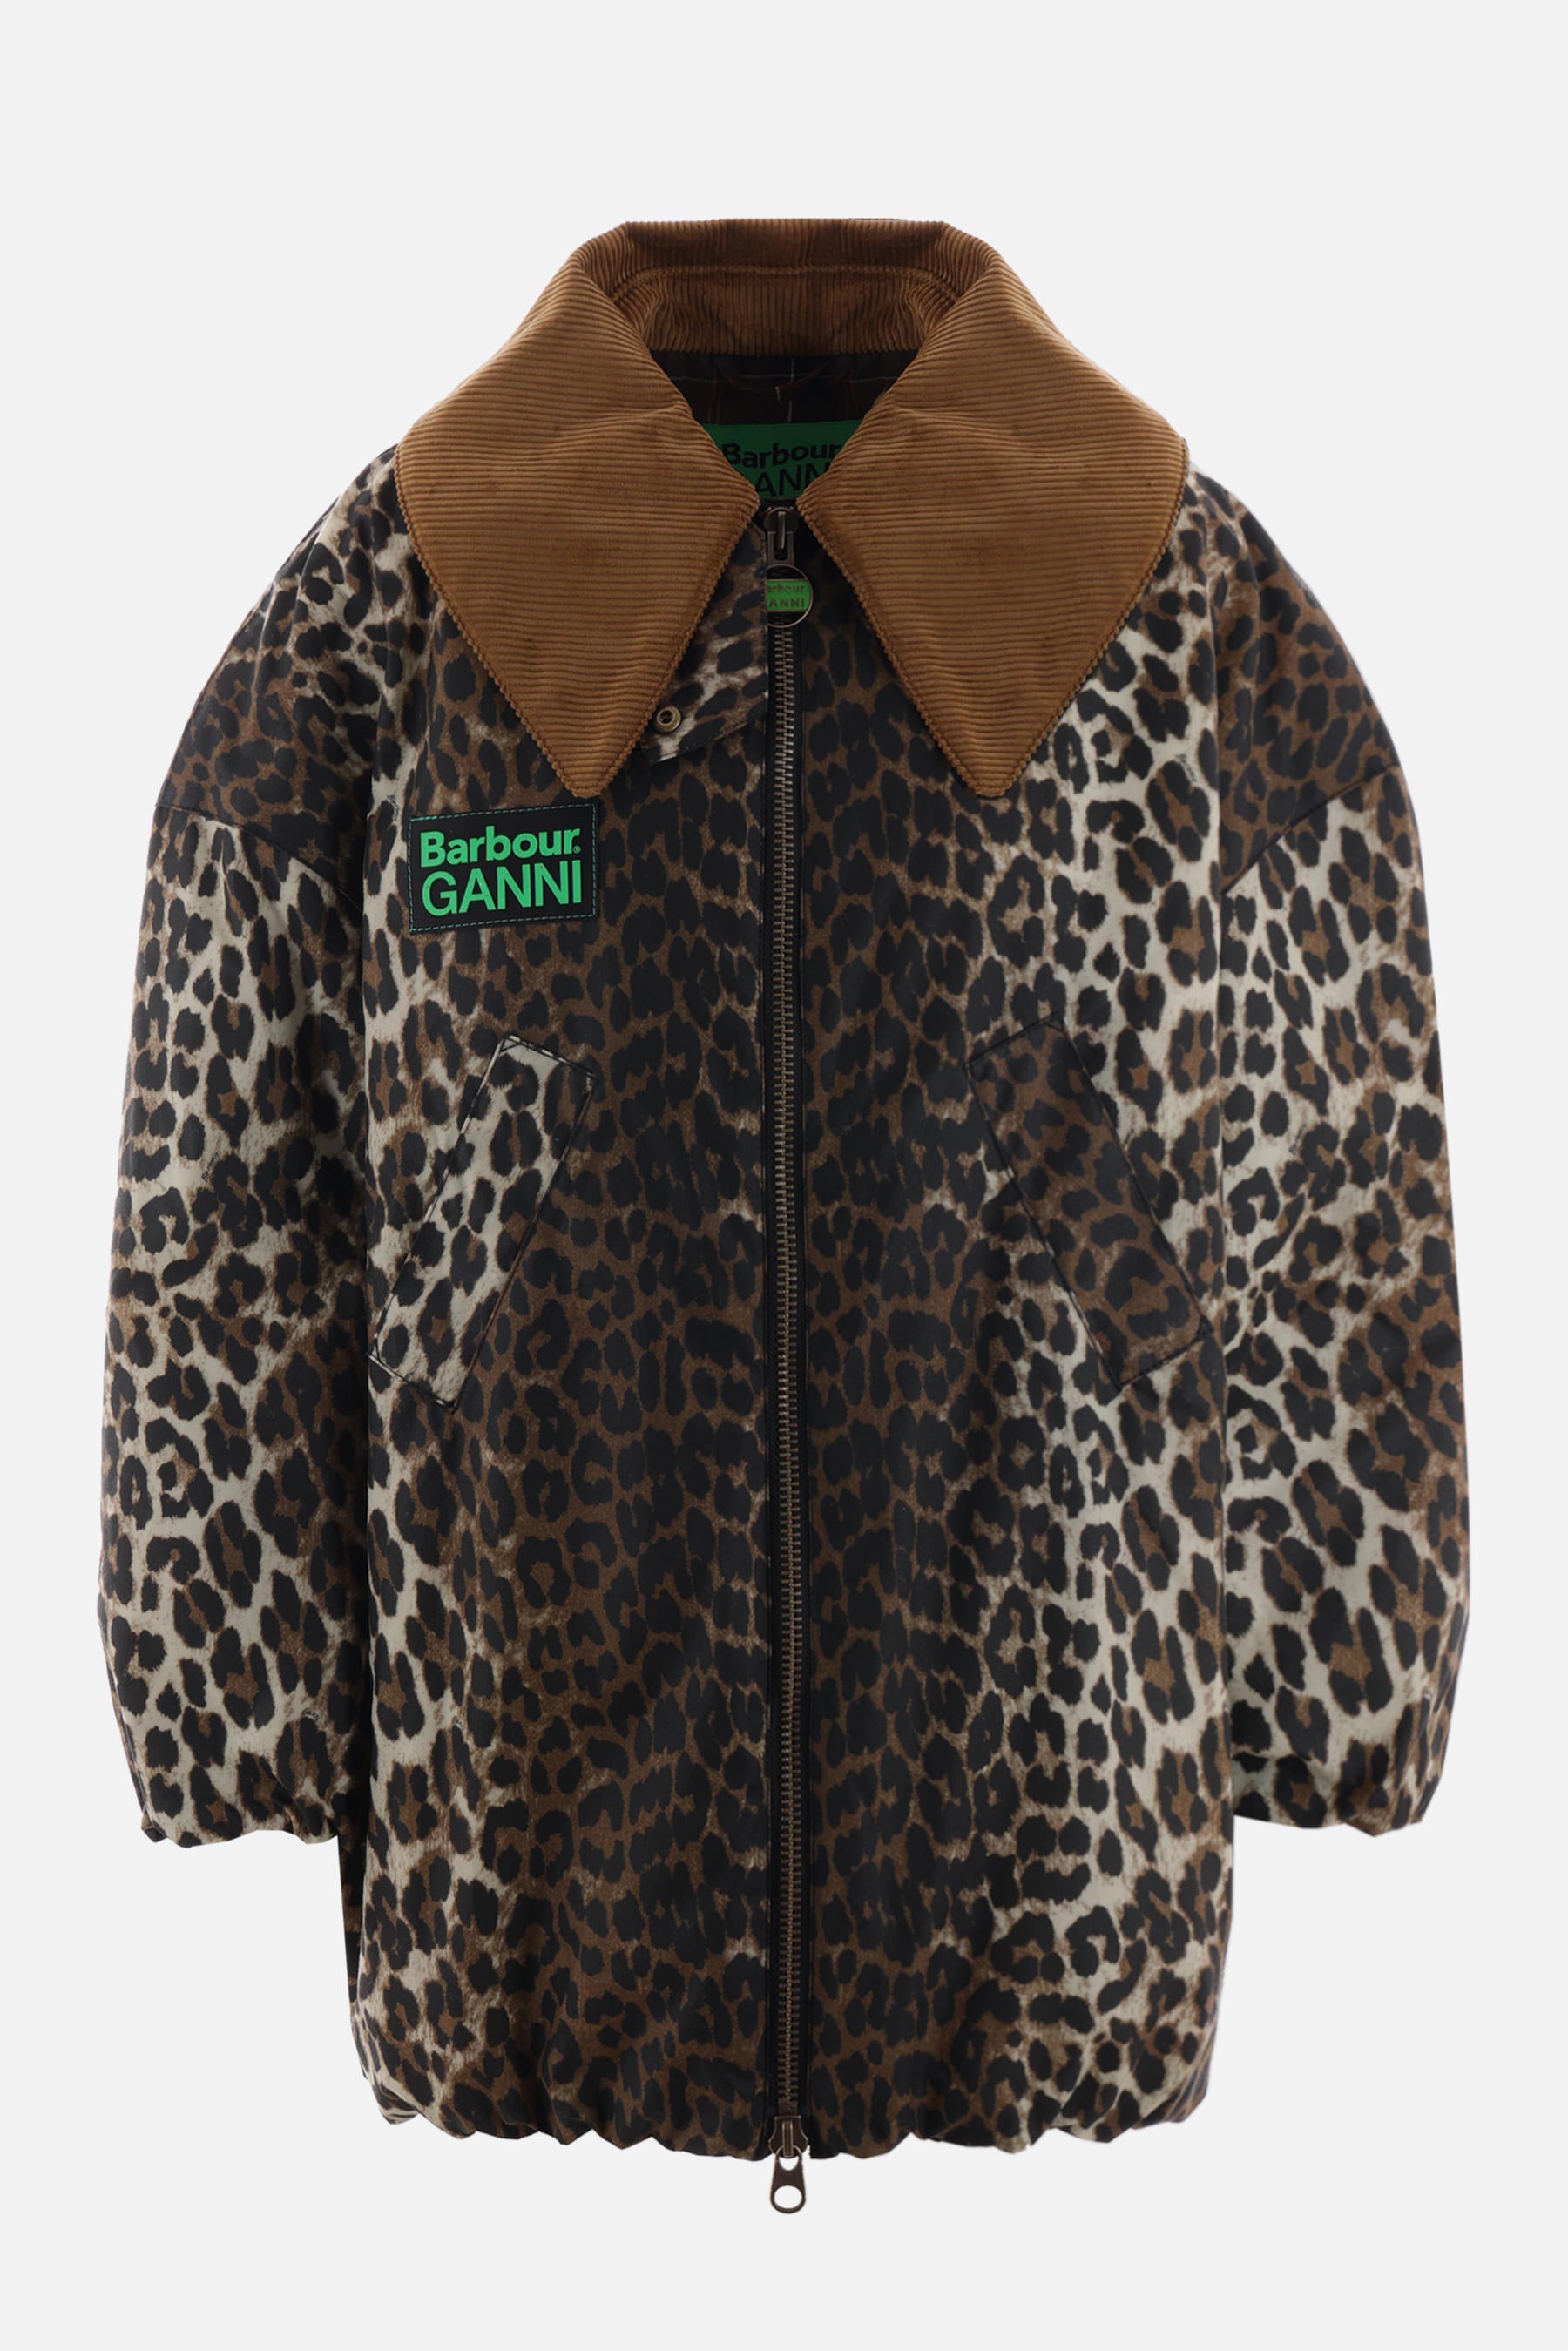 waxed organic cotton jacket with Leopard print